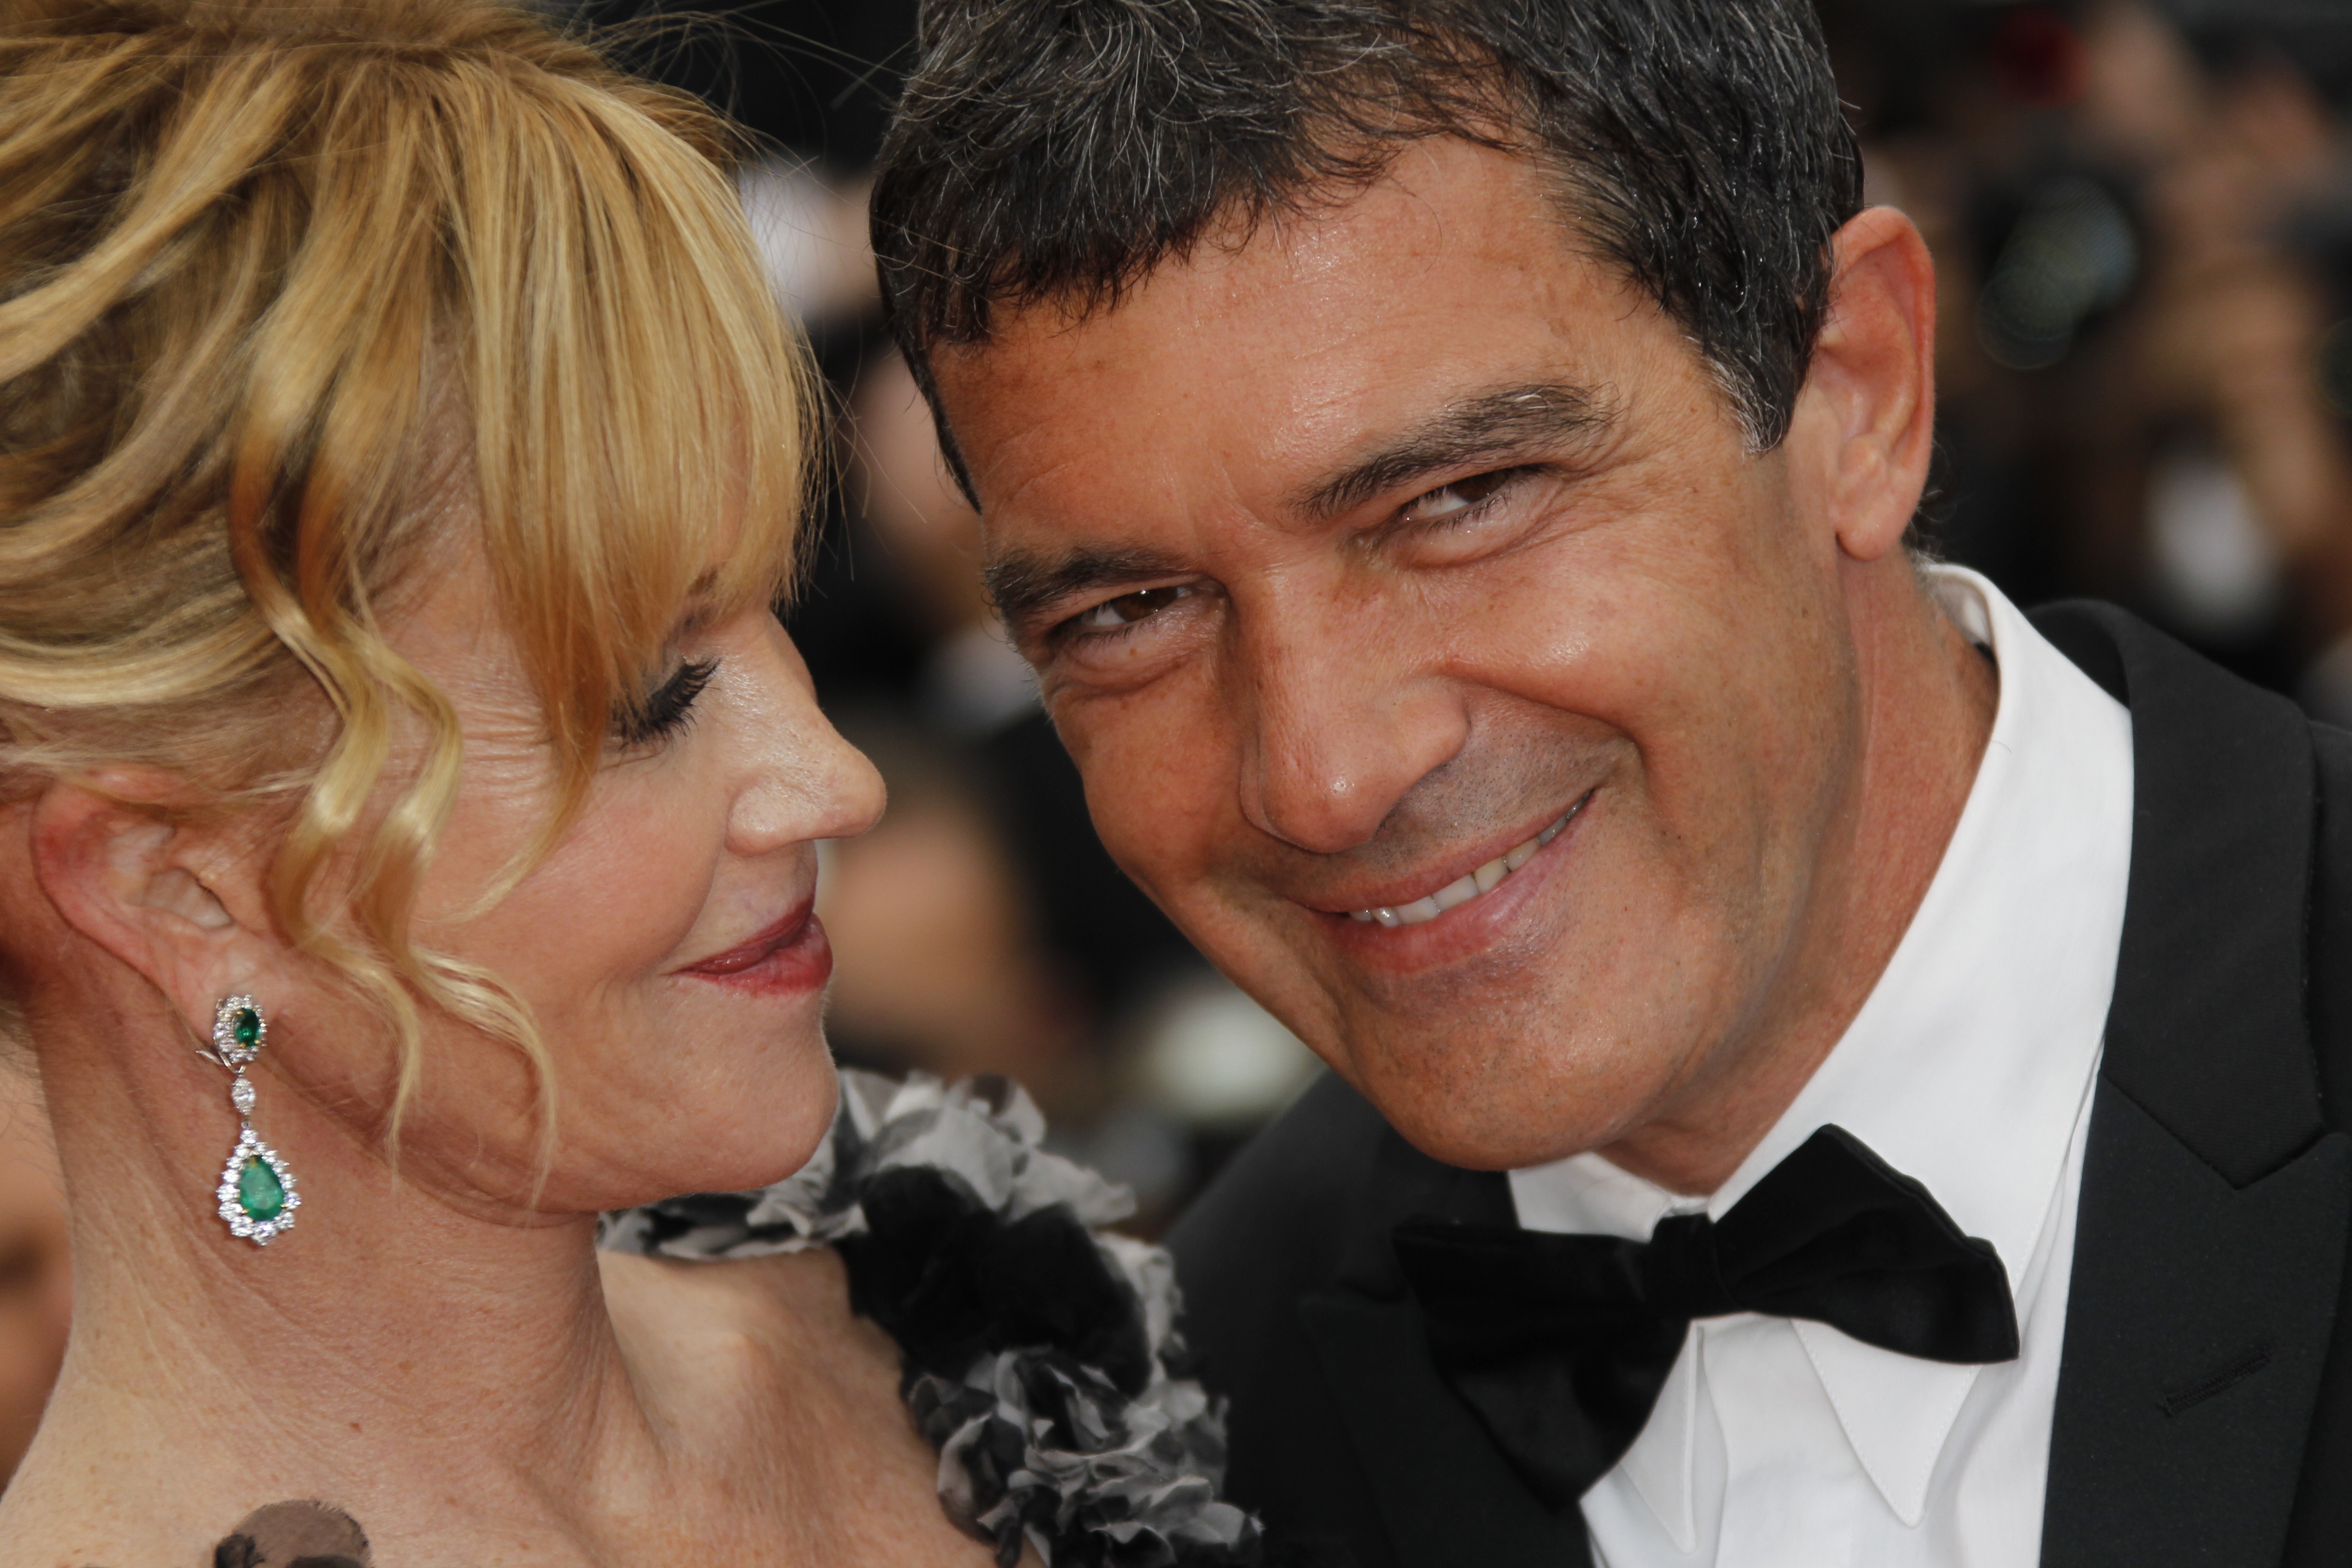 Actors Antonio Banderas and Melanie Griffith at the Opening Ceremony of the 64th Cannes International Film Festival and the screening of film 'Midnight in Paris' presented out of competition, in Cannes, France on May 11, 2011 en la foto : mirando